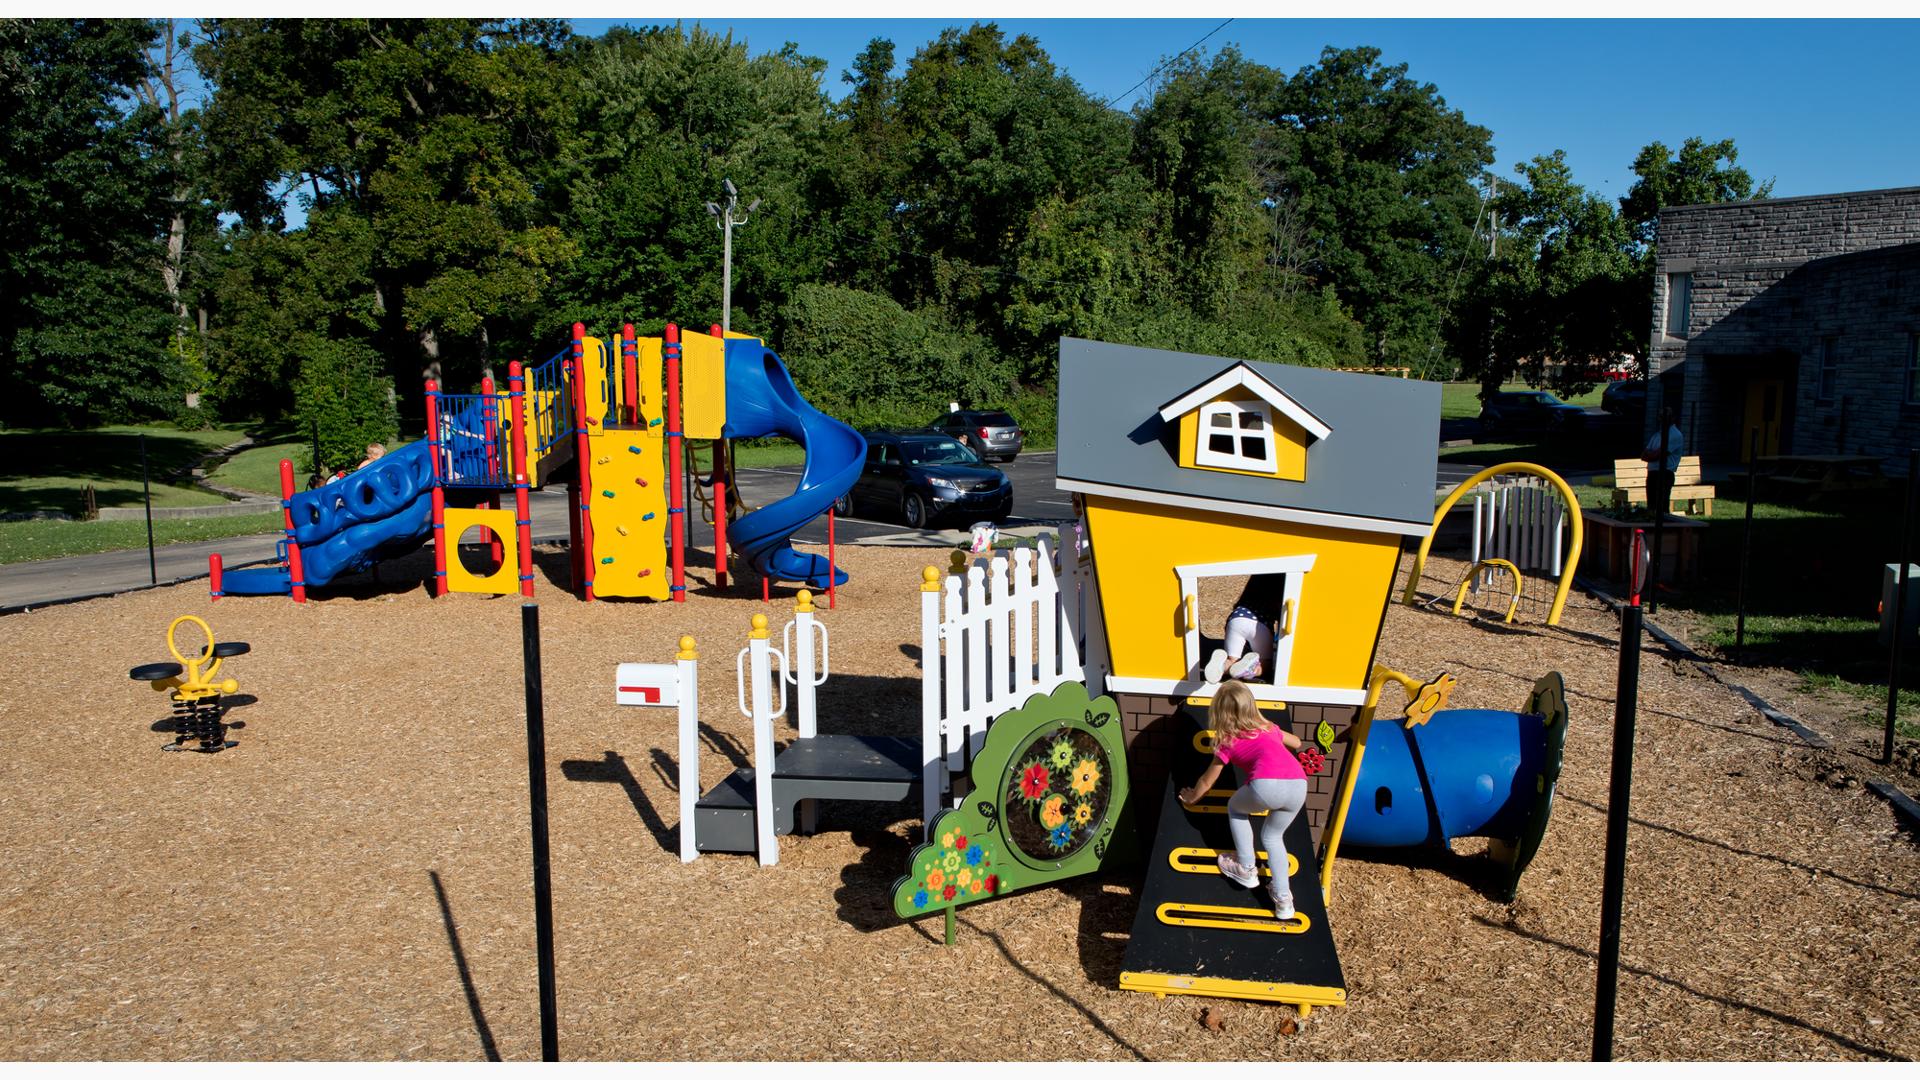 Old Bethel United Methodist Church
Indianapolis, IN.  AKABOOM!-built playground, features a PlayBooster® play structure packed with playground climbers, slides and activity panels. Additionally, Loft--part of the Smart Play® family--delivers climbers, tunnels, slides and more. Plus, freestanding play components like the Bobble Rider™ and Rhapsody® Warble®.